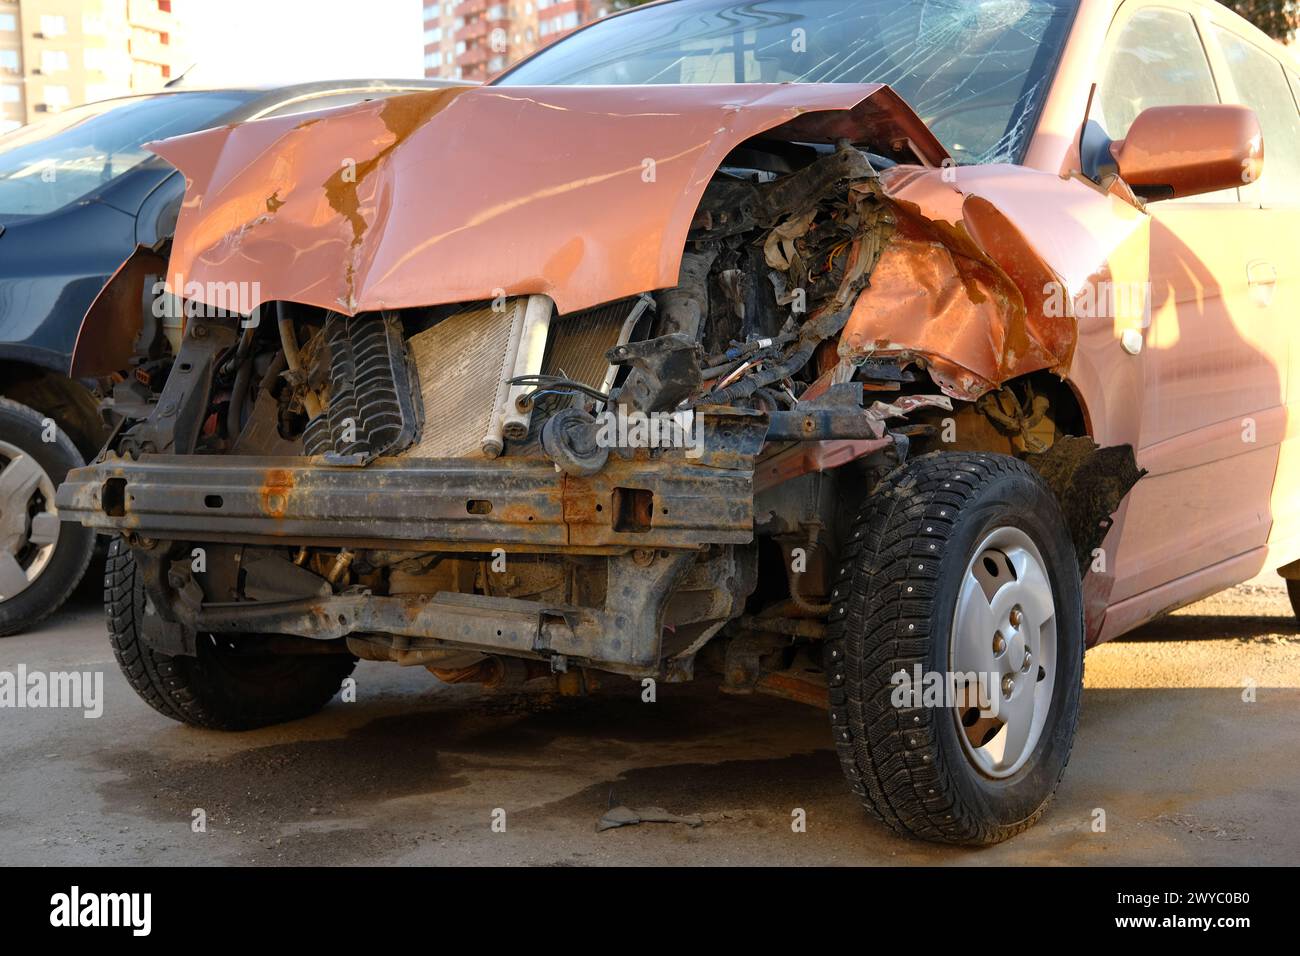 Destroyed car in traffic accident on city road. Smashed broken front of orange auto after crash. Stock Photo